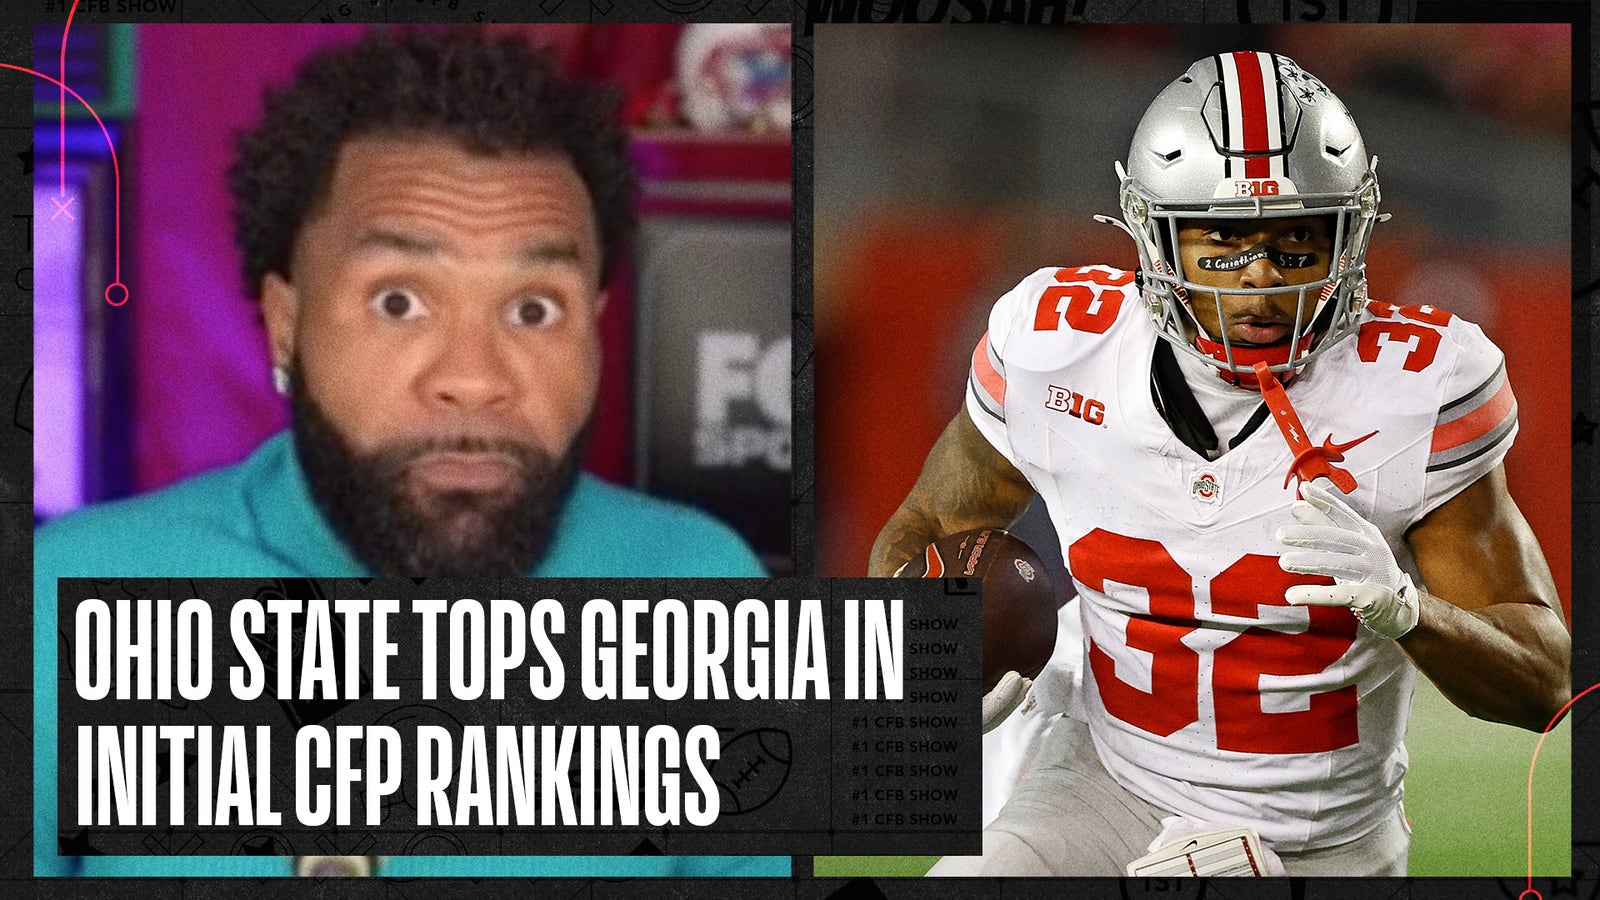 Ohio State is ranked ABOVE Georgia in the initial CFP rankings